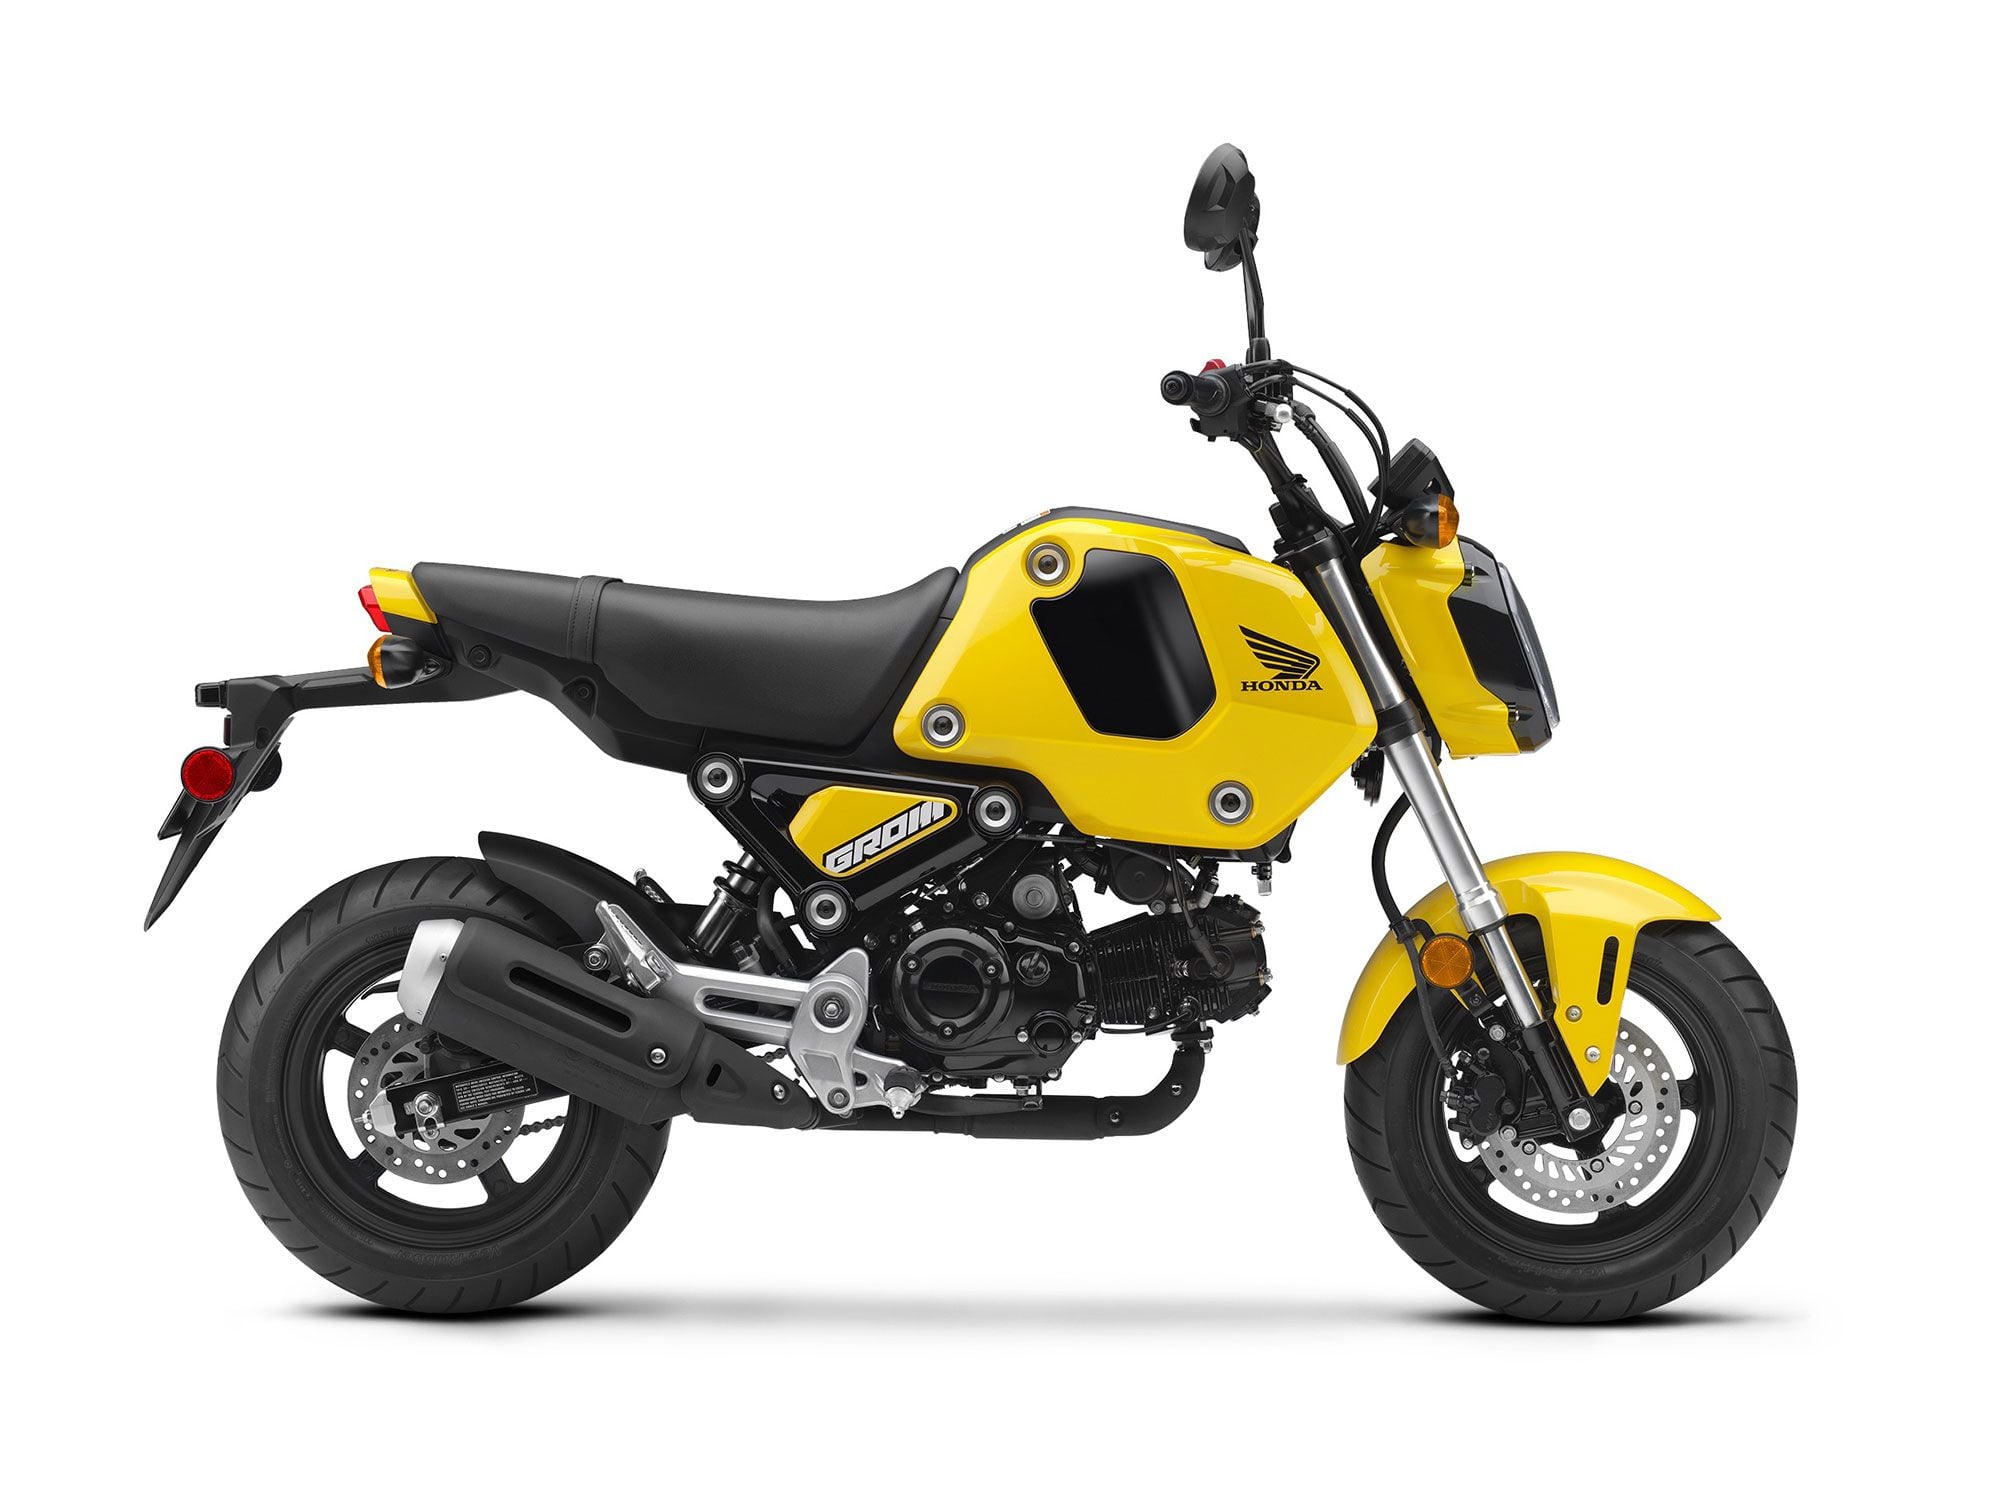 As noted in last year’s Euro release, the US-bound Grom will also have new bodywork and a Euro 5-spec engine with a five-speed gearbox. Here’s the base trim in Queen Bee Yellow.